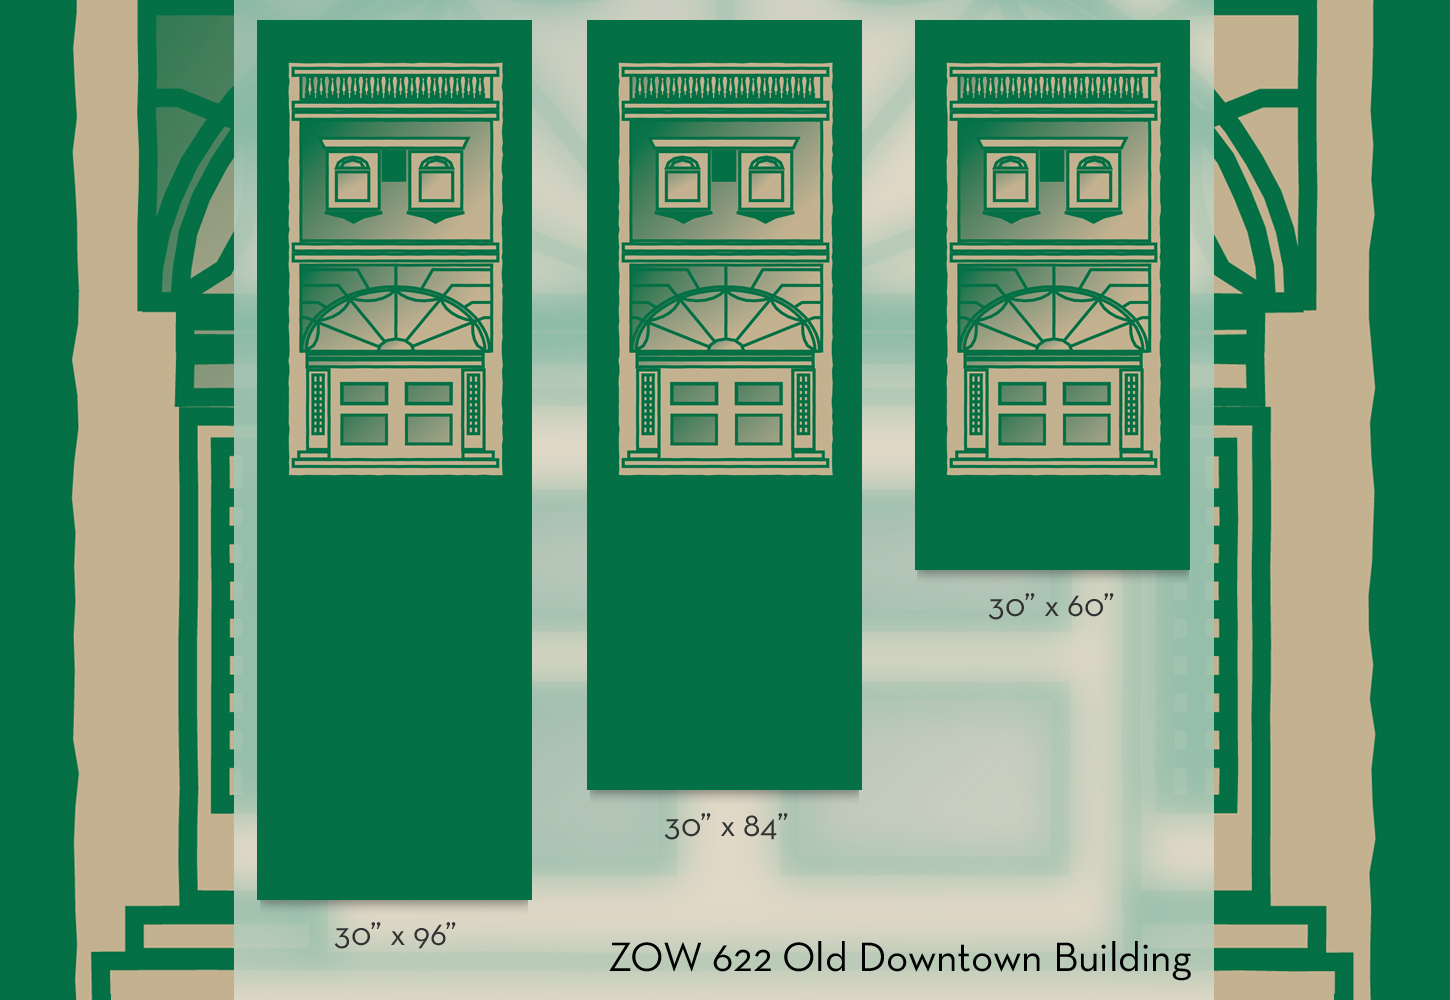 ZOW 622 Old Downtown Building